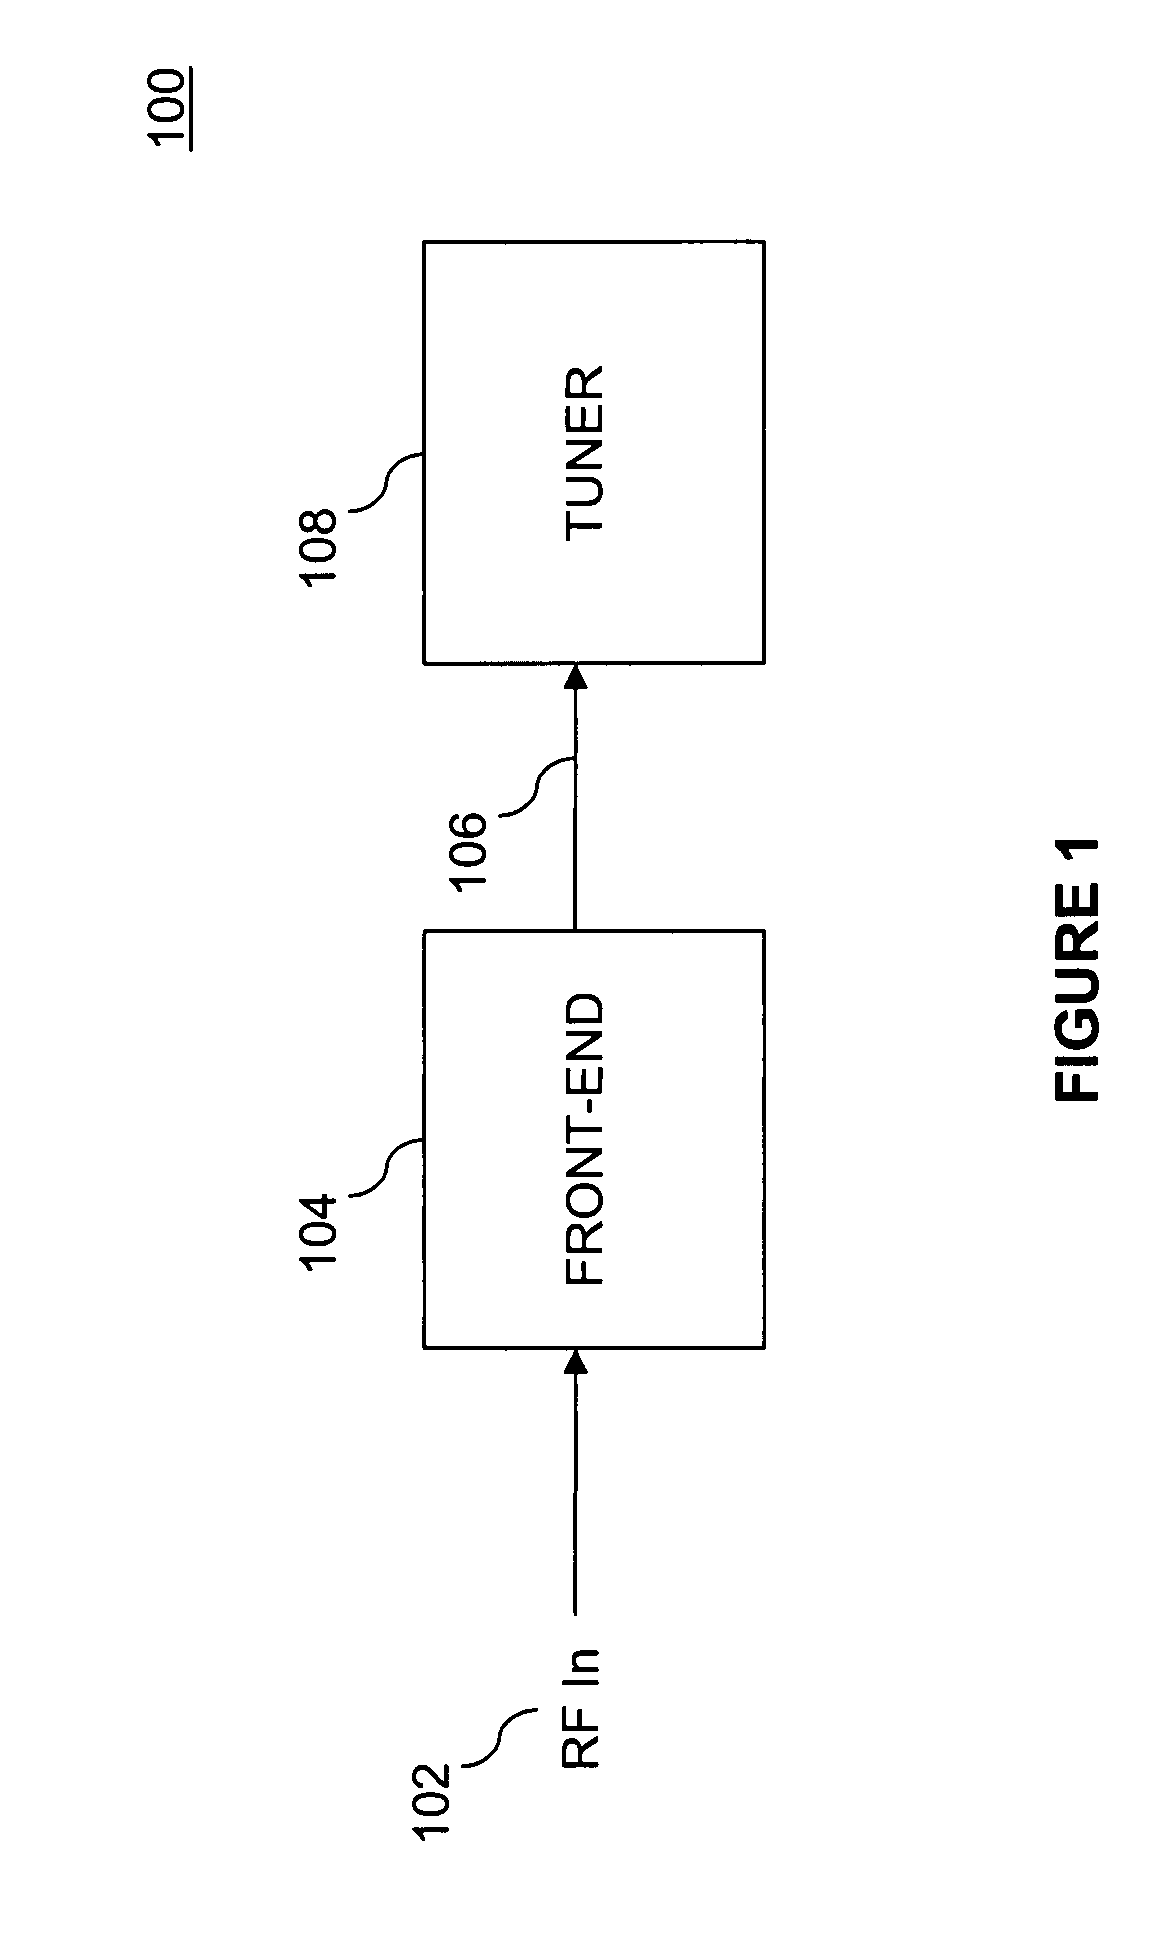 Front-end integrated circuit for television receivers